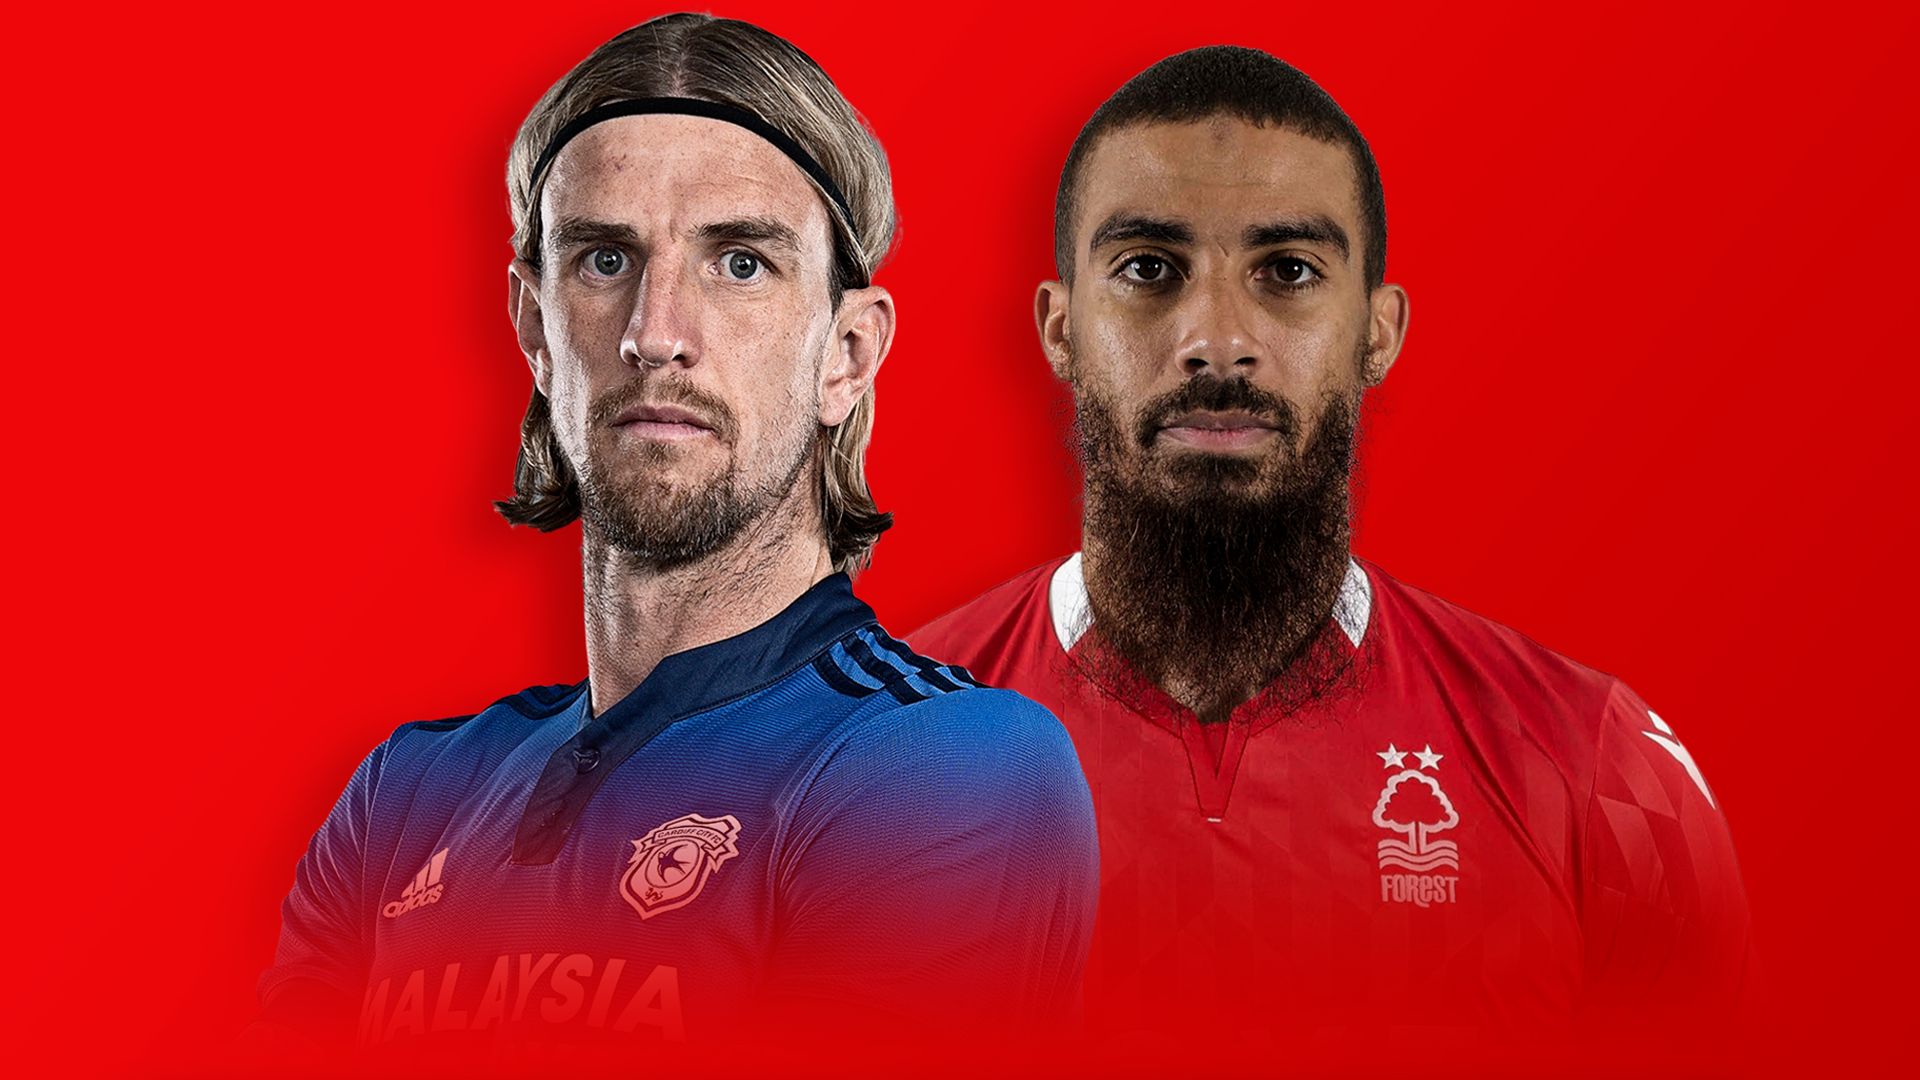 Cardiff vs Nottingham Forest preview: Championship clash live on Sky Sports Football